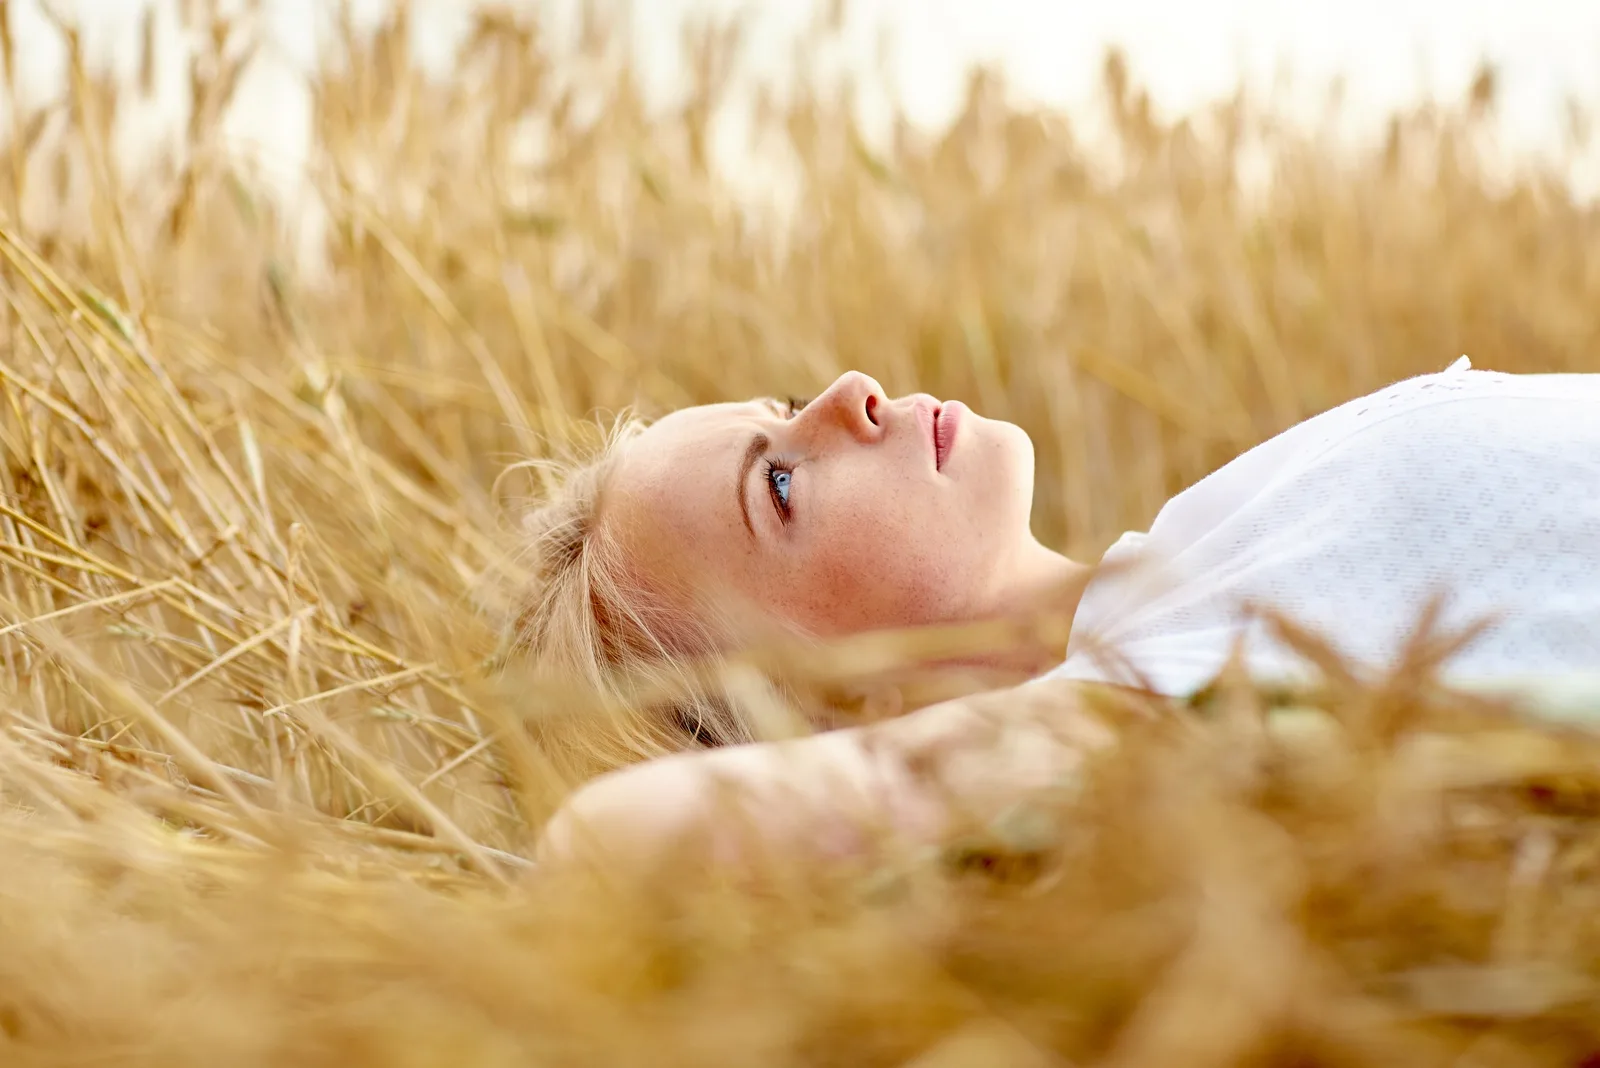 the woman lies in a field of wheat